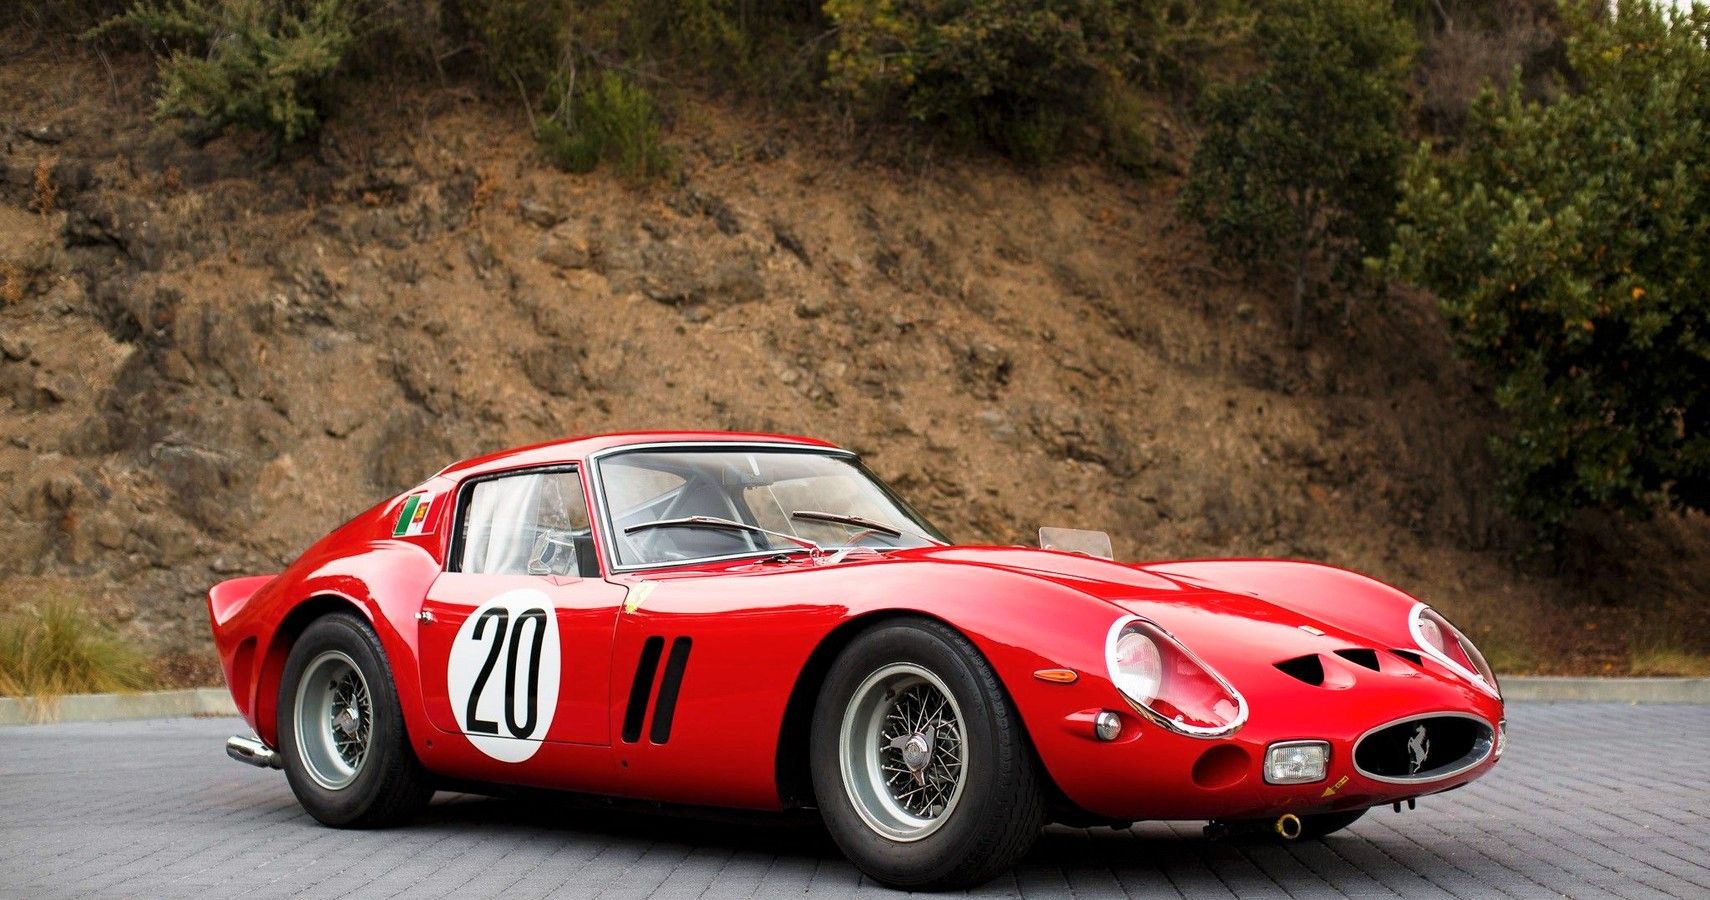 10 Of The Most Gorgeous Italian Cars Of All Time